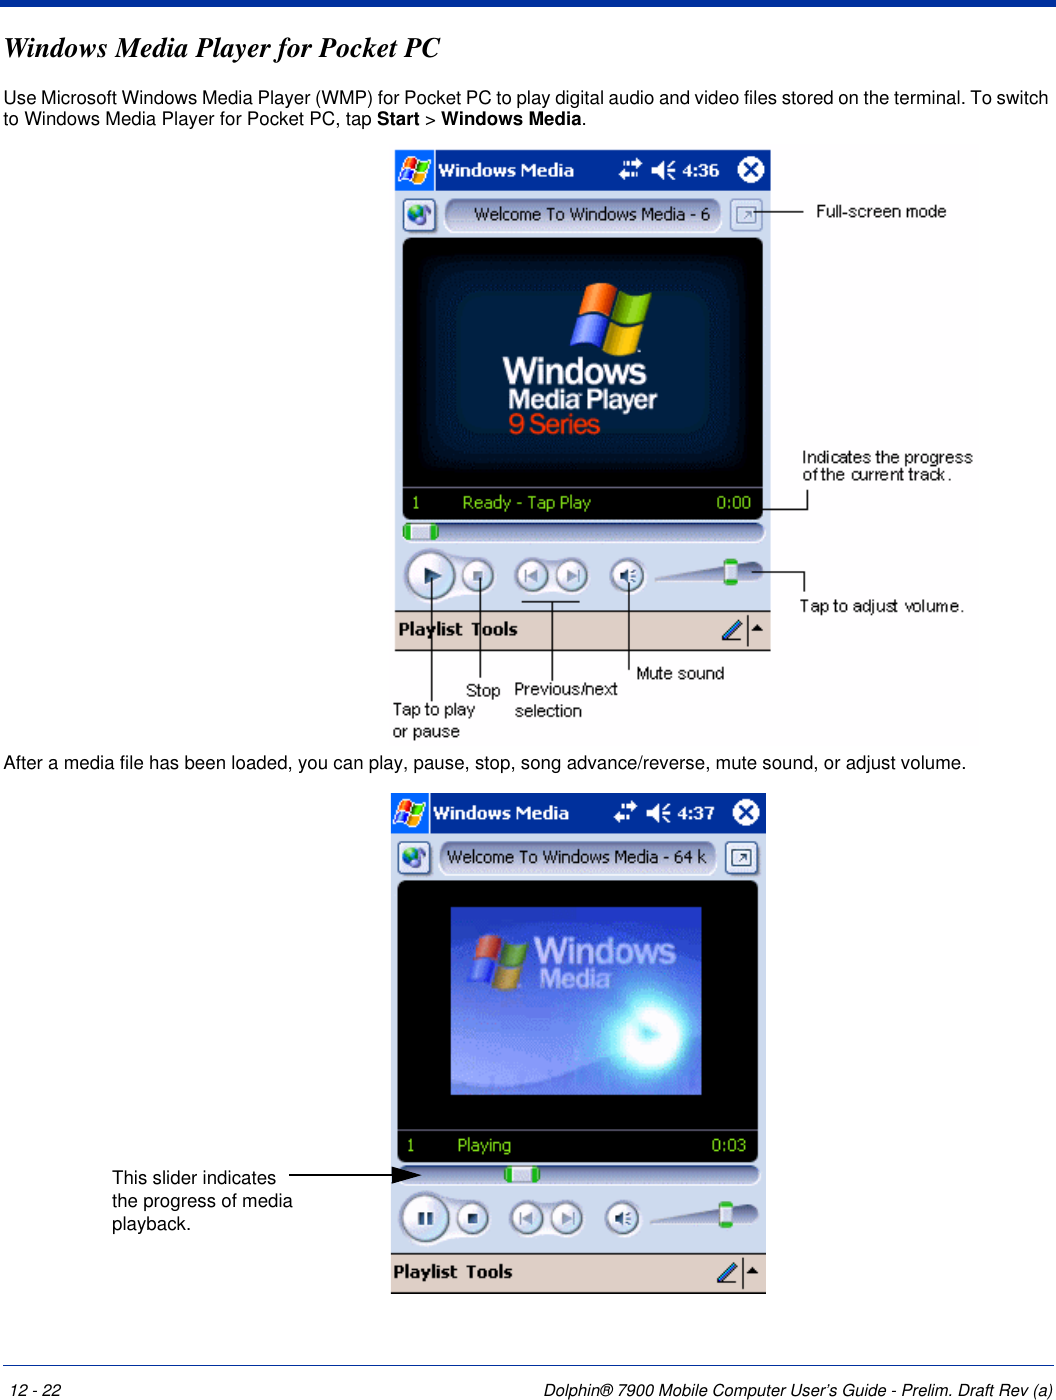 12 - 22 Dolphin® 7900 Mobile Computer User’s Guide - Prelim. Draft Rev (a)Windows Media Player for Pocket PCUse Microsoft Windows Media Player (WMP) for Pocket PC to play digital audio and video files stored on the terminal. To switch to Windows Media Player for Pocket PC, tap Start &gt; Windows Media.After a media file has been loaded, you can play, pause, stop, song advance/reverse, mute sound, or adjust volume. This slider indicates the progress of media playback.